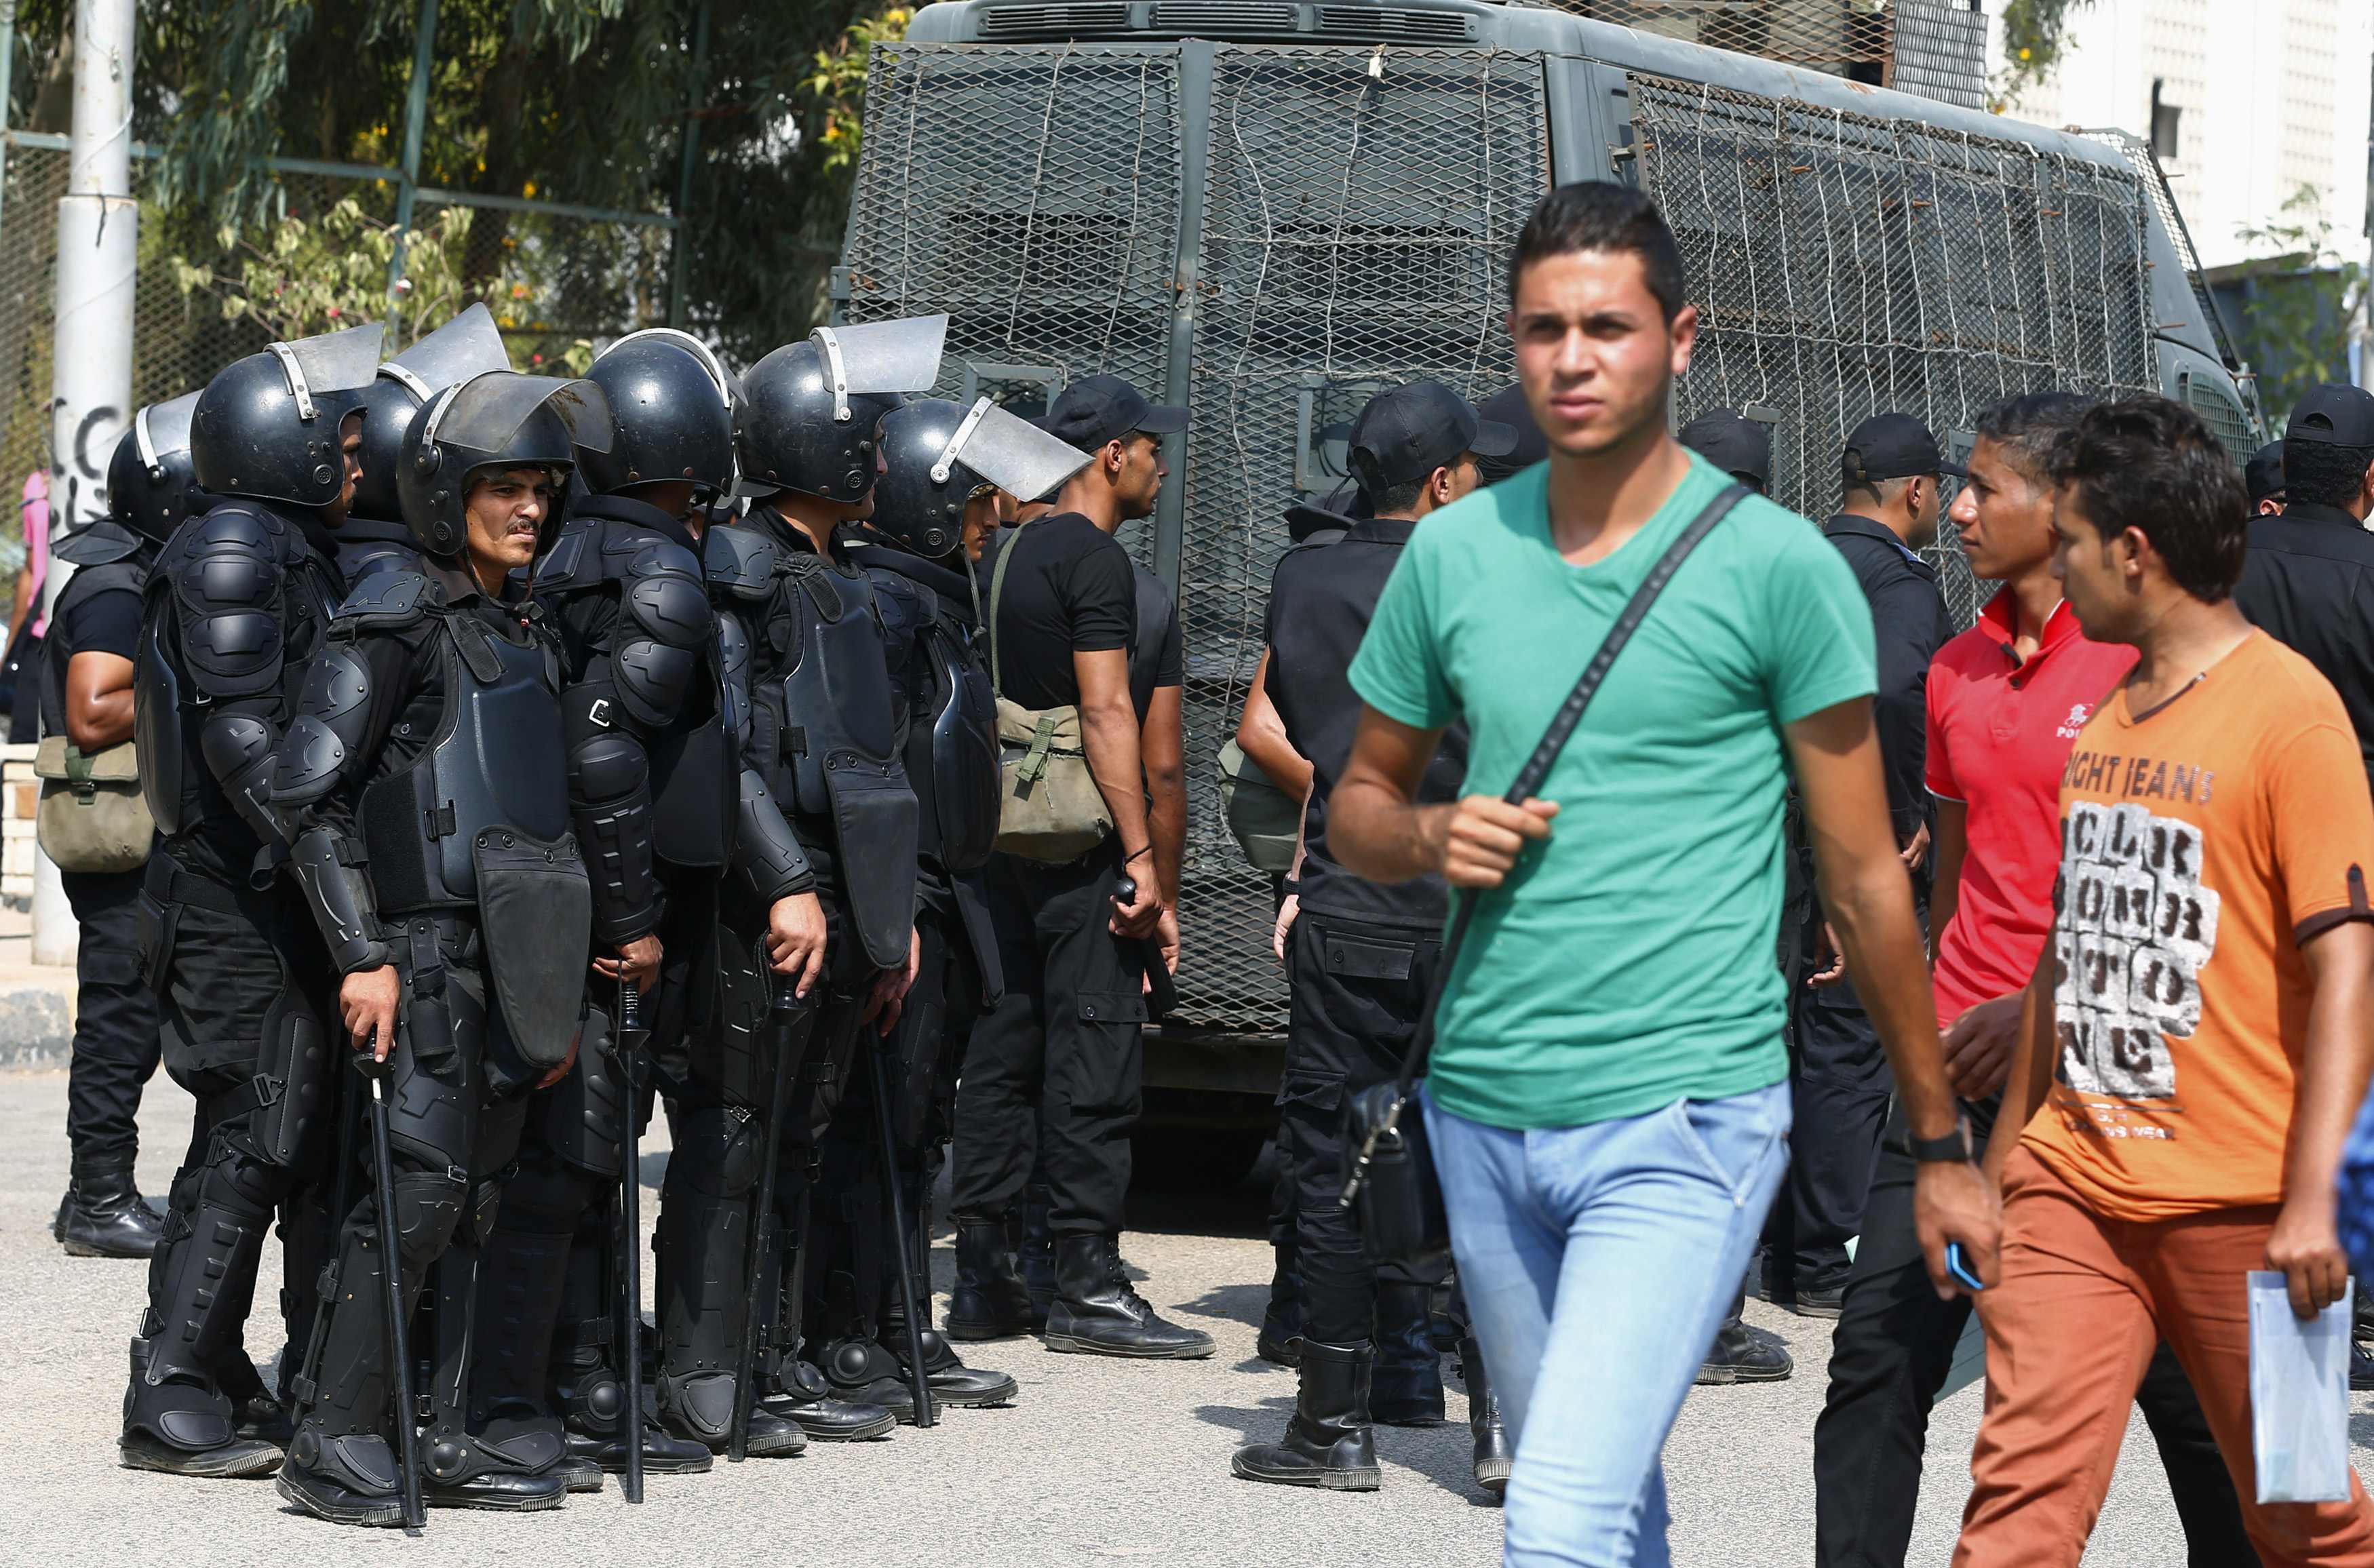 Al-Azhar University students walk past riot police during a protest conducted by the pro-Muslim Brotherhood student movement,  Students Against the Coup, October 12, 2014. Credit: Amr Abdallah Dalsh/Reuters